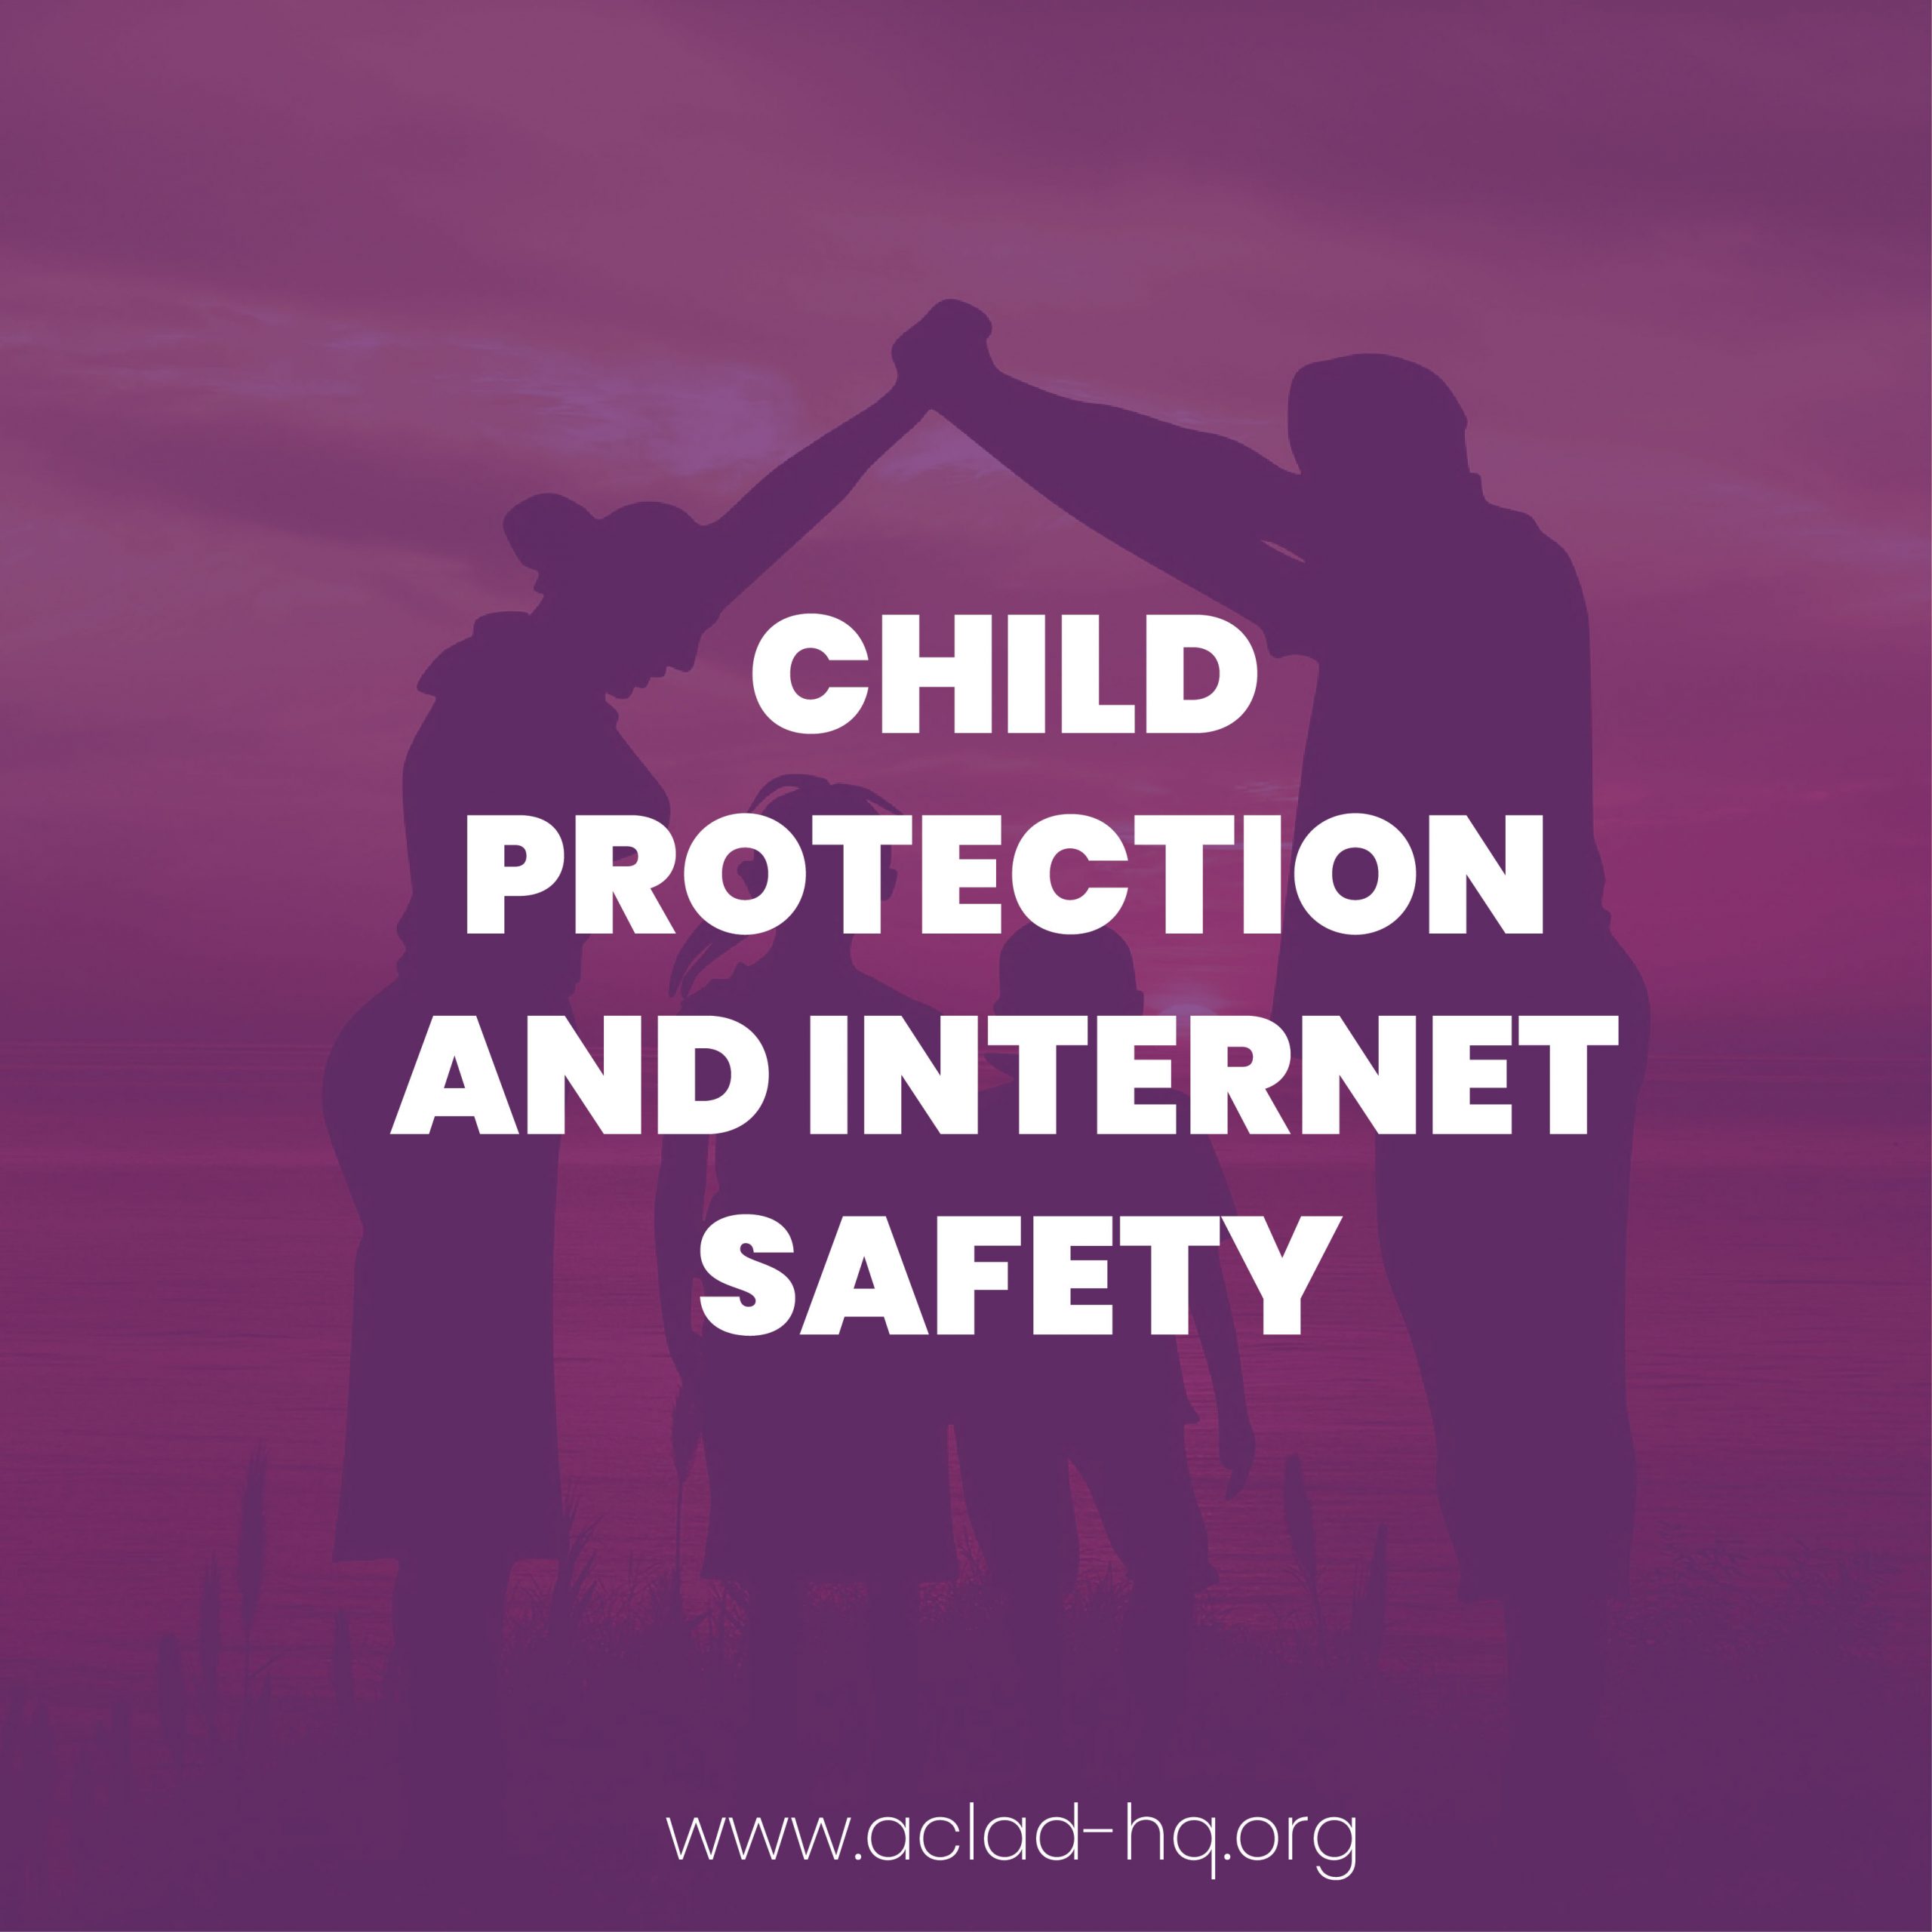 Child protection and internet safety